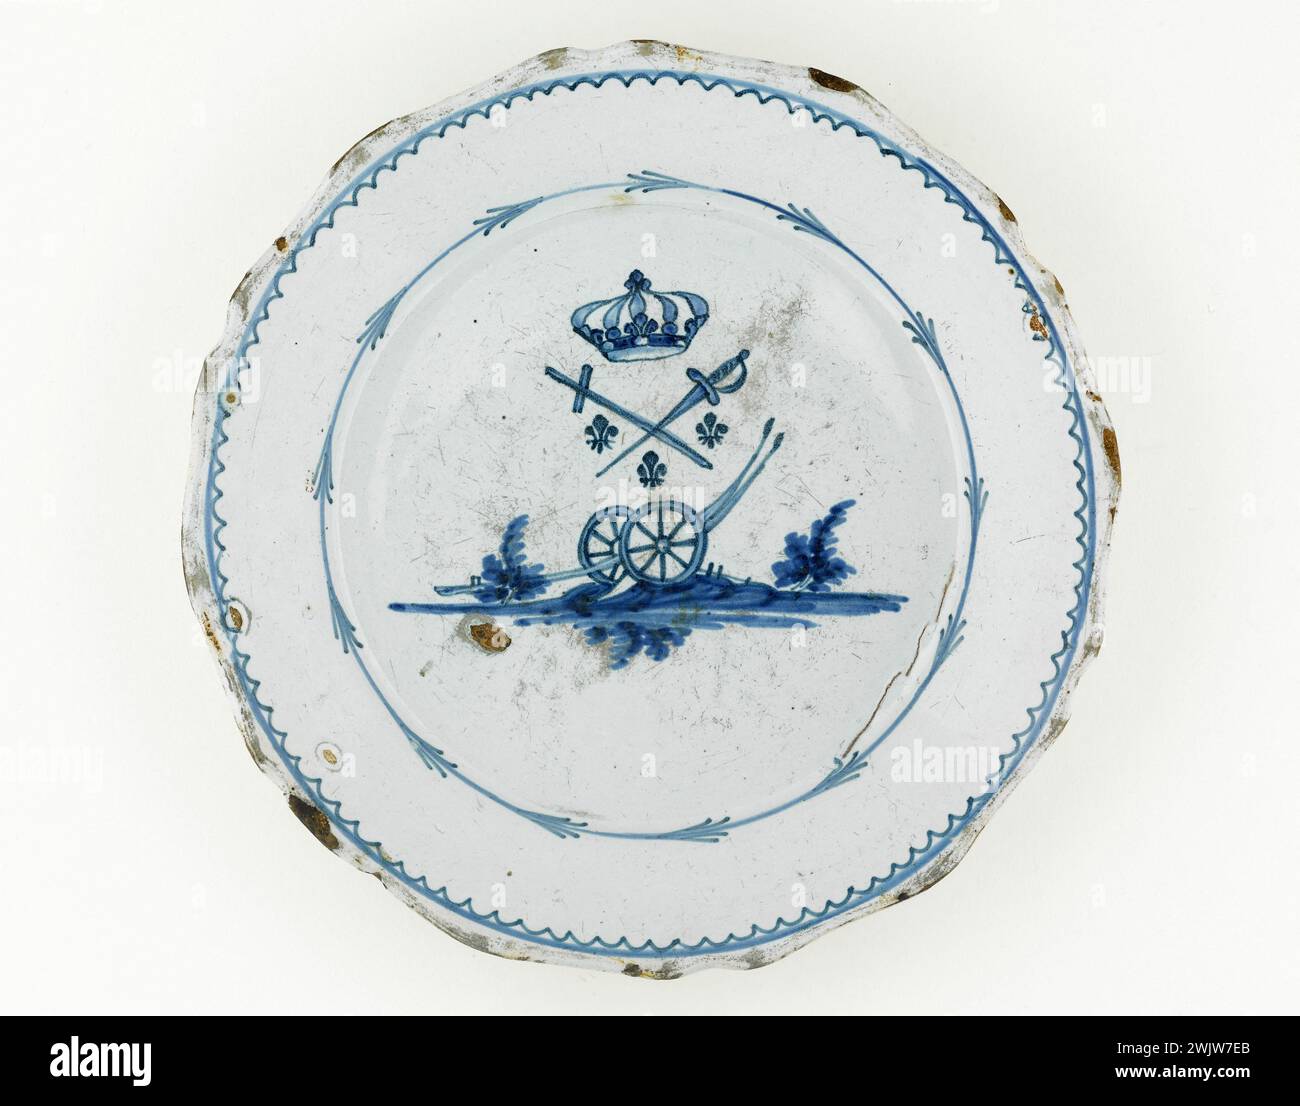 Anonymous. Plate. Earthenware. Around 1789. Paris, Carnavalet museum. 70955-50 Canon, Crown, Epee, Faience, Lys, Decorative Pattern, Revolutionary Periode, Crockery, Plate Stock Photo